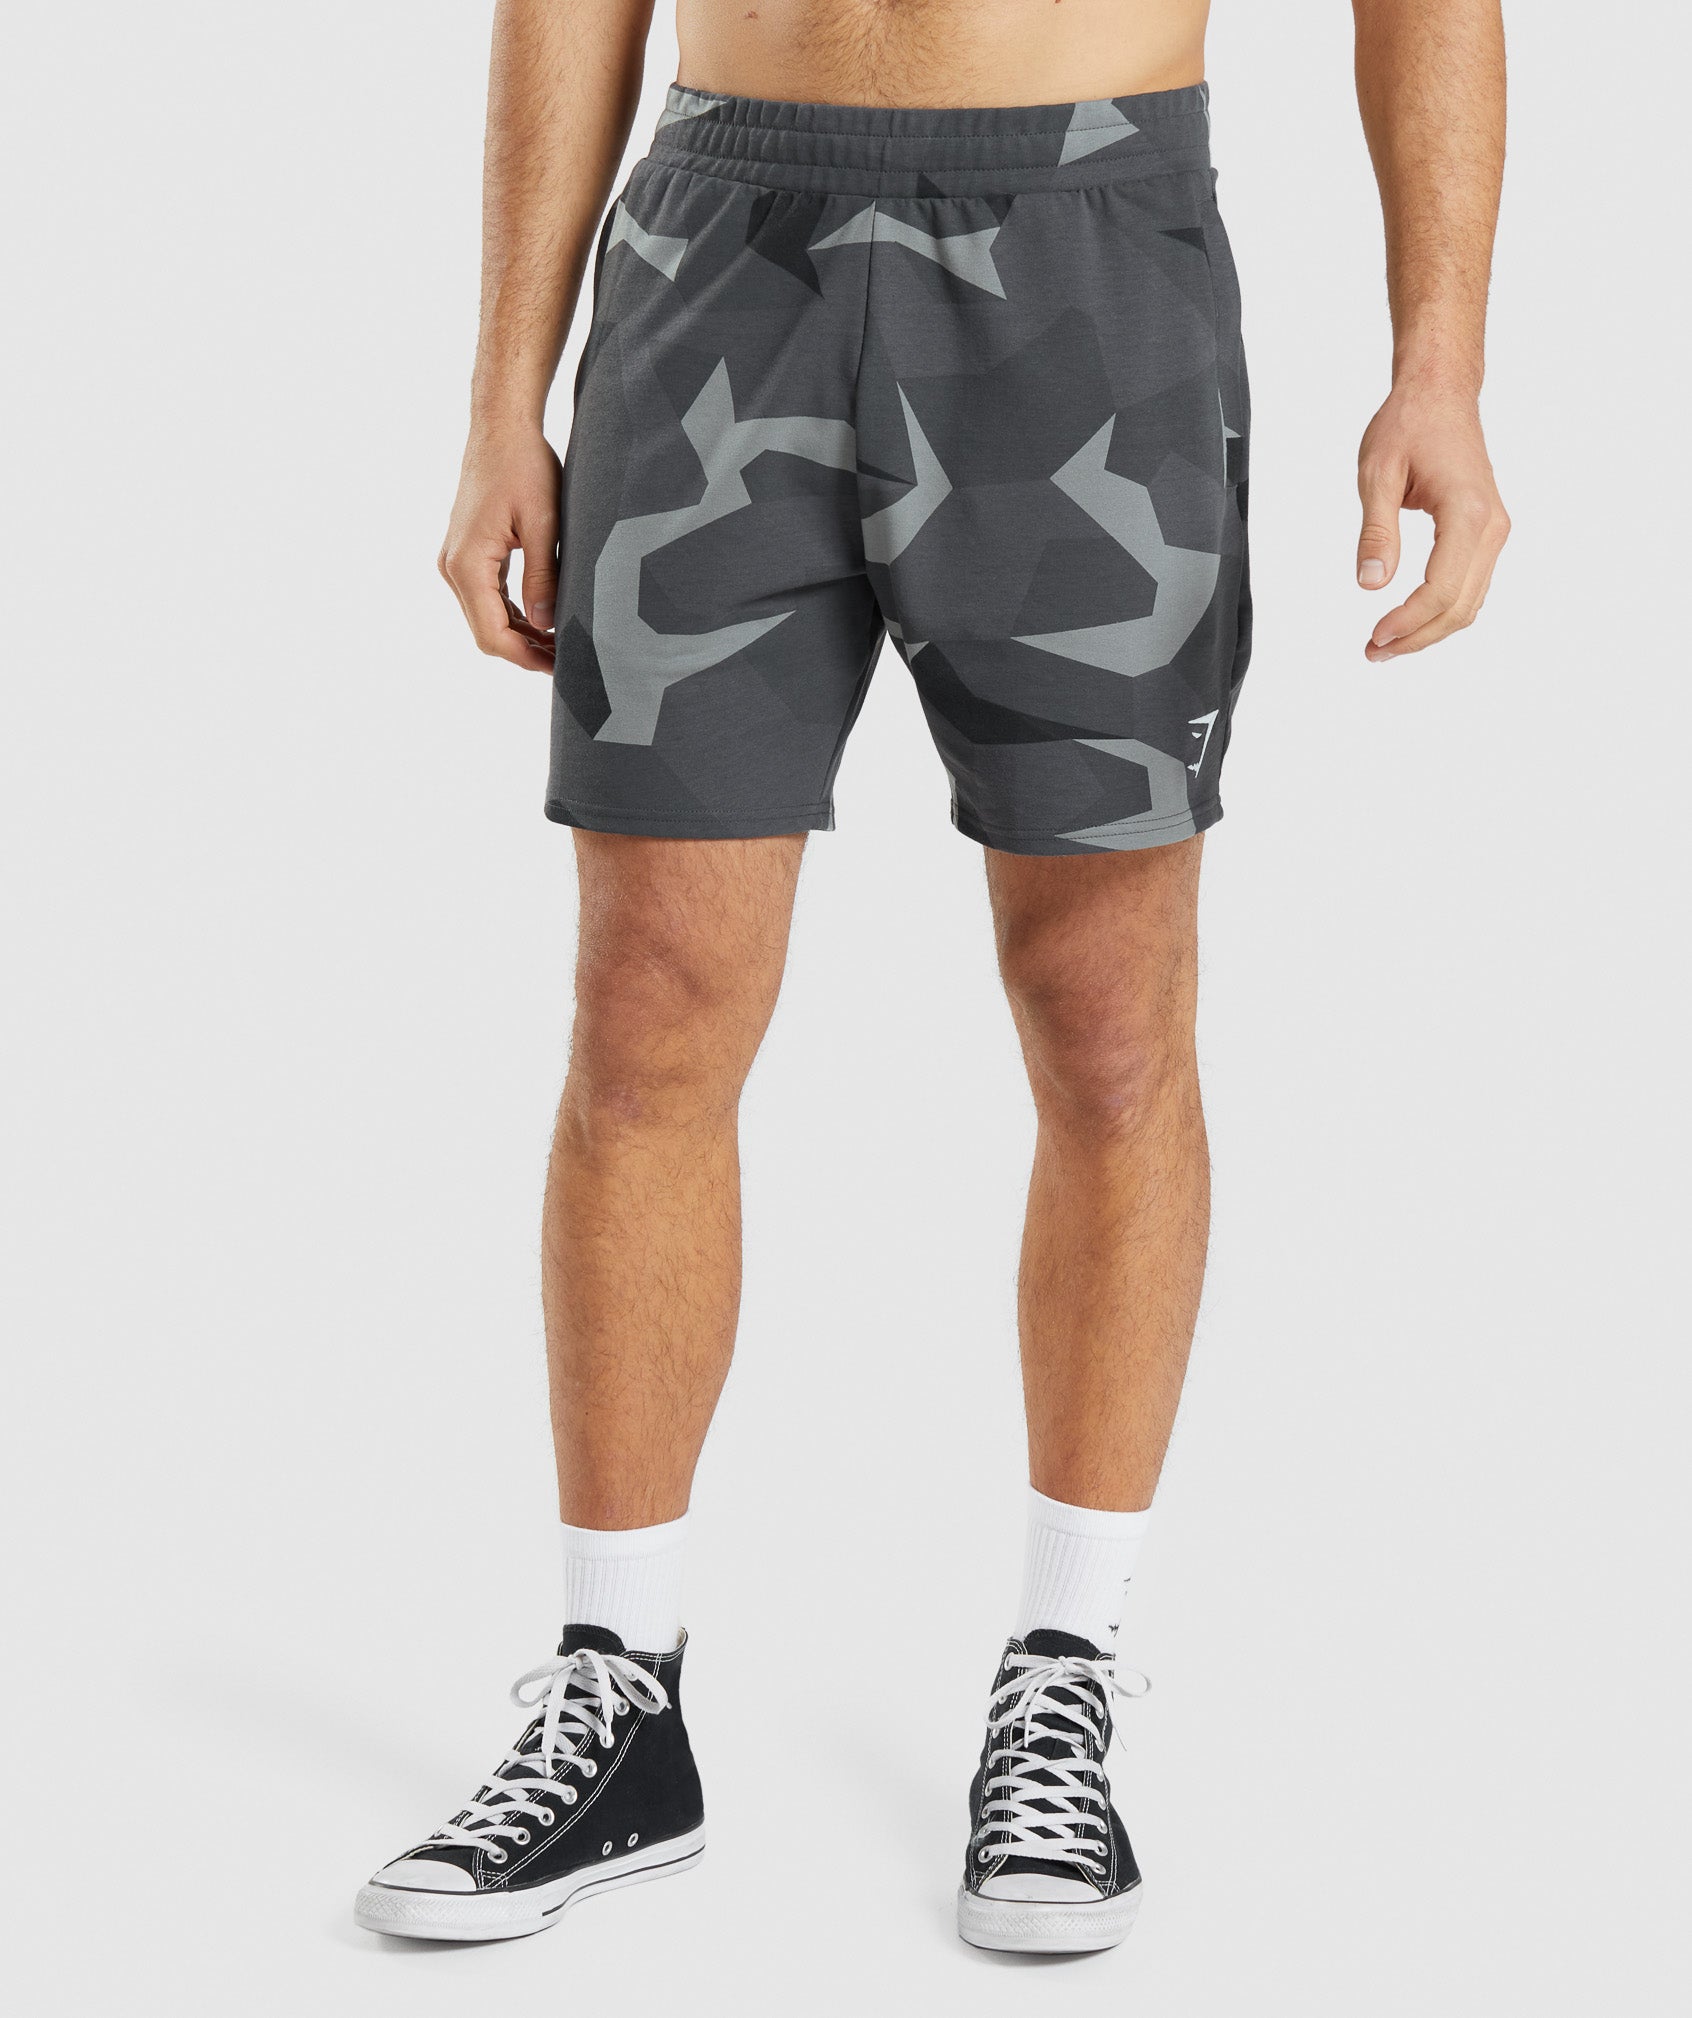 Critical 7" Shorts in Black Print - view 1